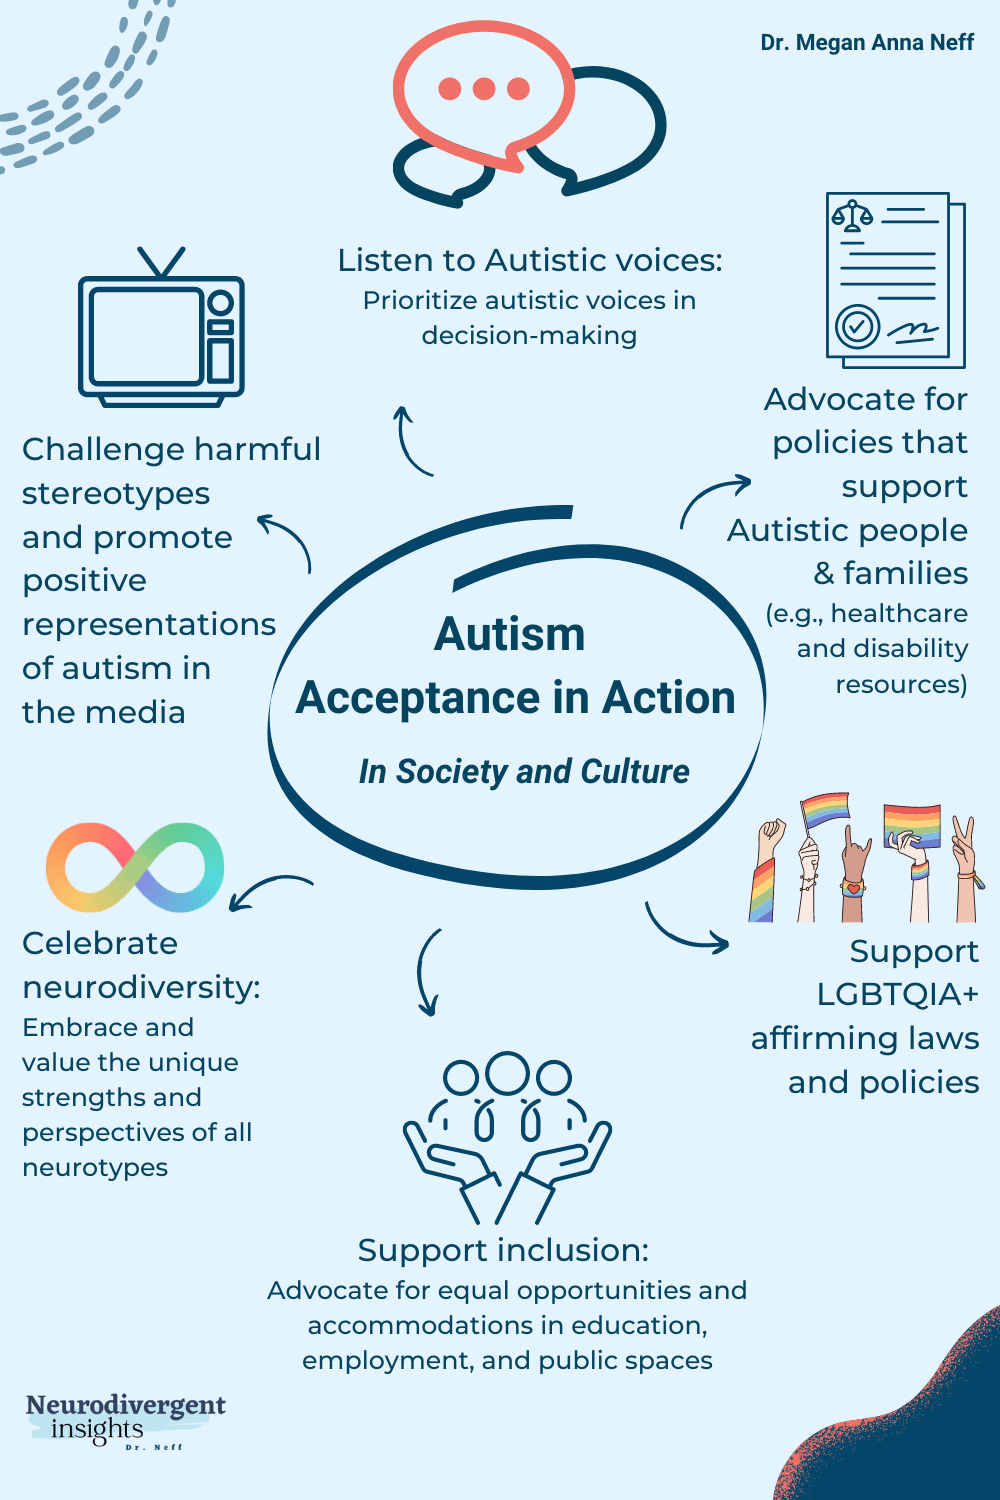 Autism Acceptance and Awareness in Society and Culture Infographic